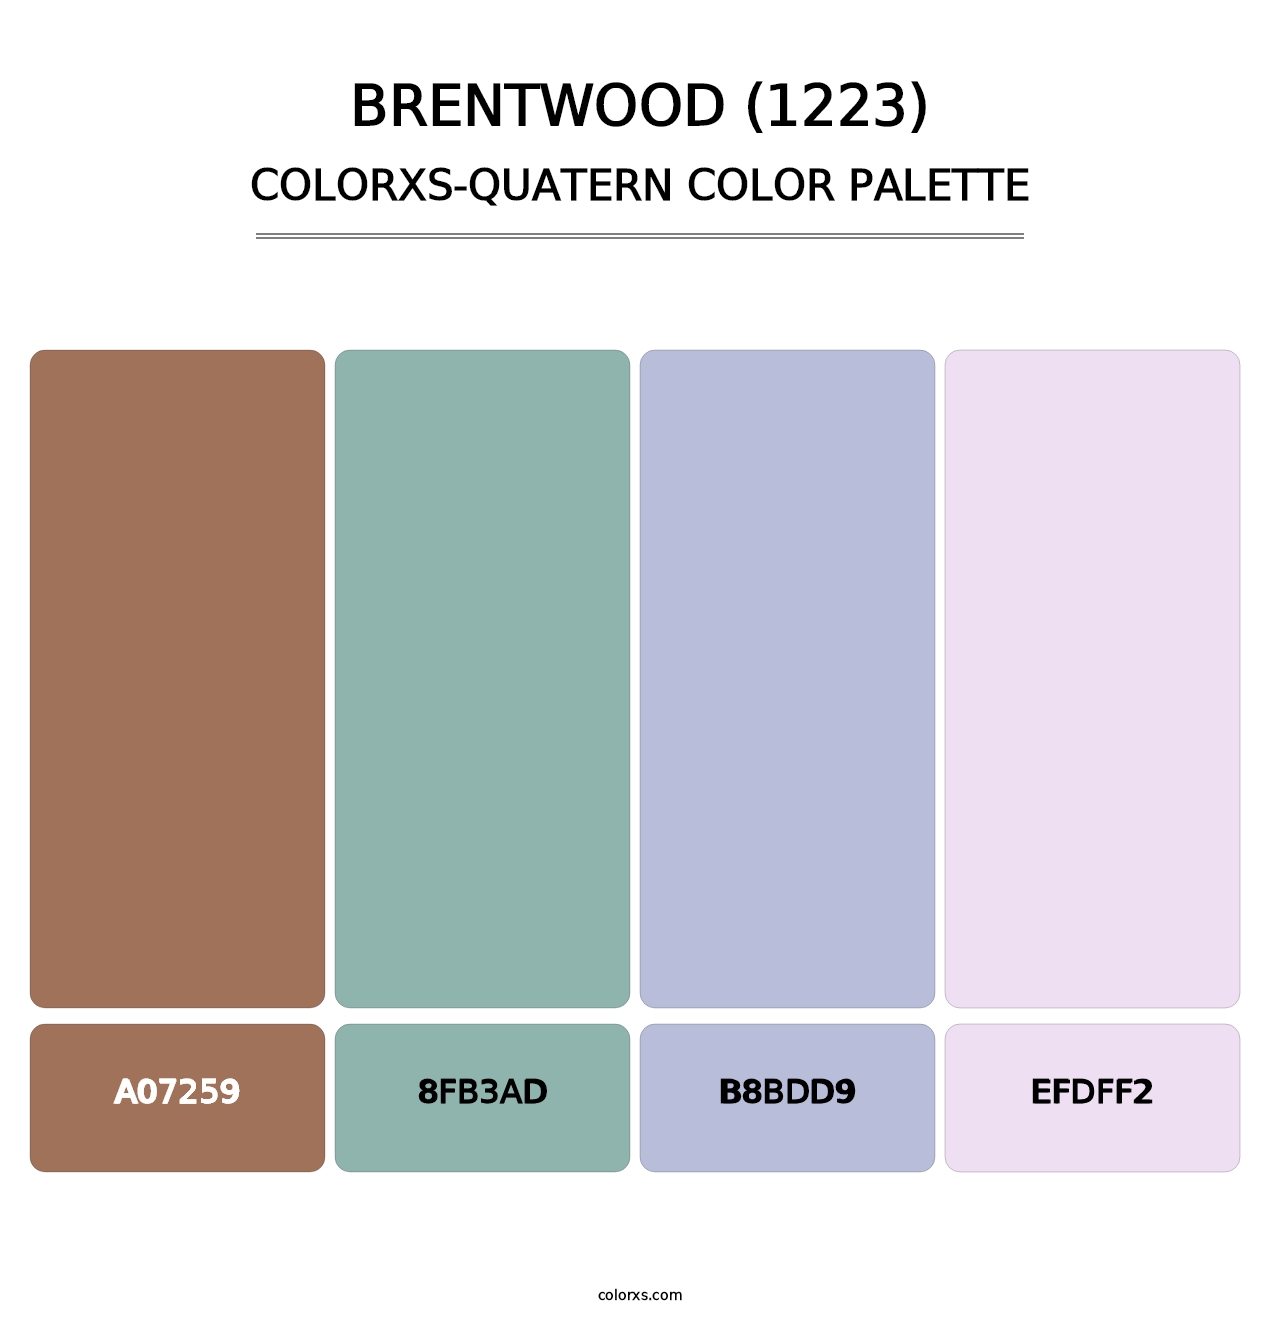 Brentwood (1223) - Colorxs Quatern Palette